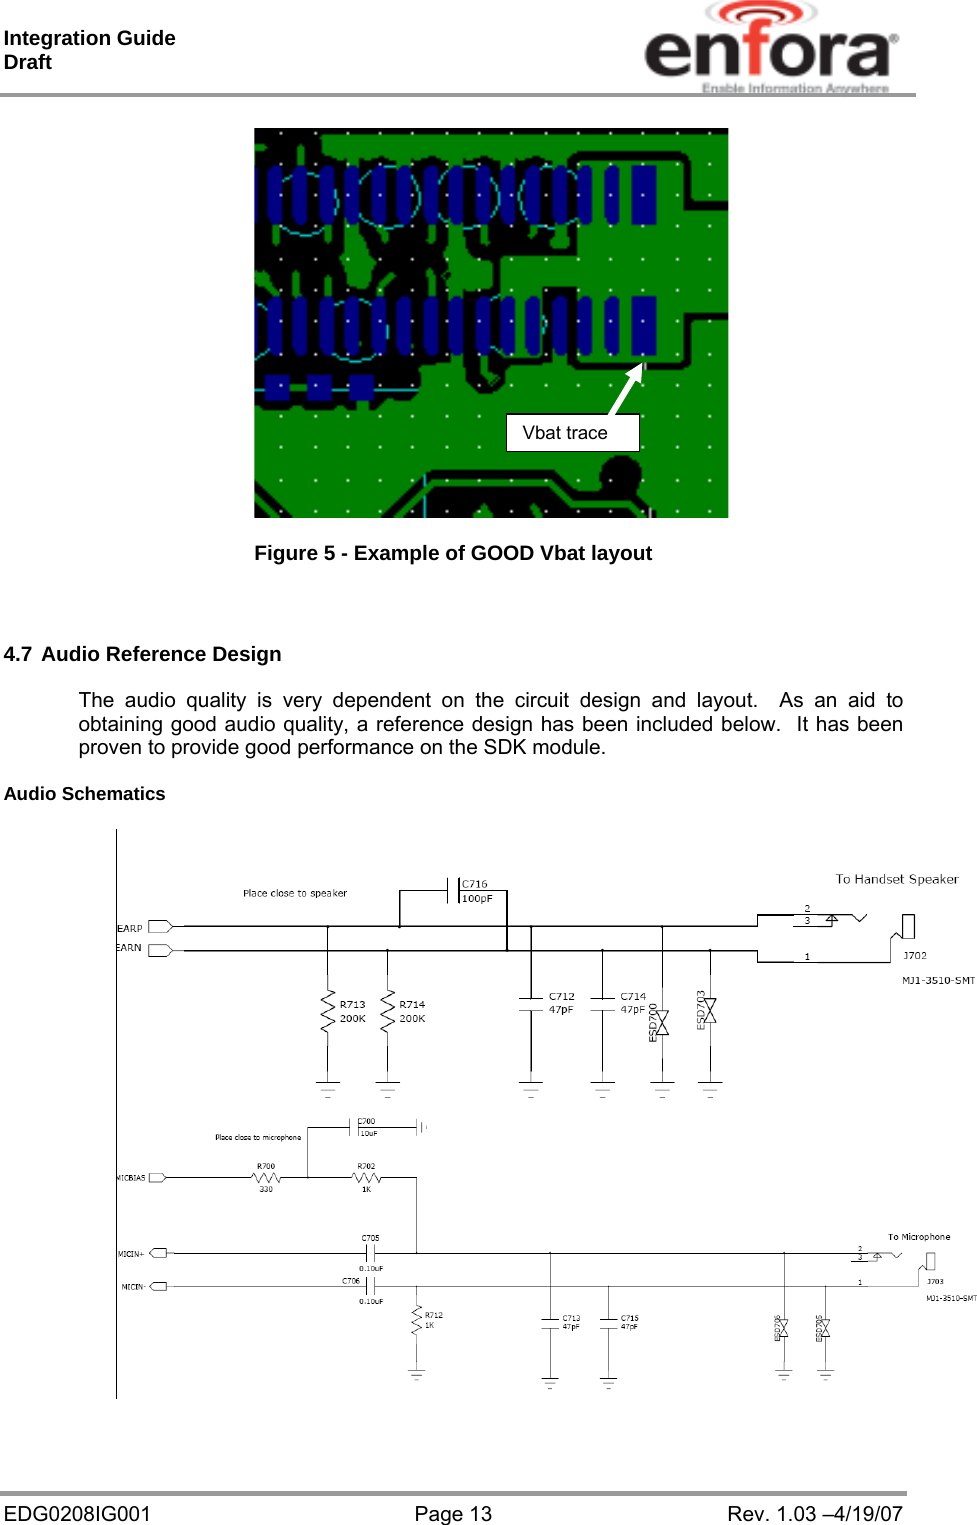 Integration Guide  Draft EDG0208IG001  Page 13  Rev. 1.03 –4/19/07  Figure 5 - Example of GOOD Vbat layout    4.7 Audio Reference Design  The audio quality is very dependent on the circuit design and layout.  As an aid to obtaining good audio quality, a reference design has been included below.  It has been proven to provide good performance on the SDK module.  Audio Schematics    Vbat trace